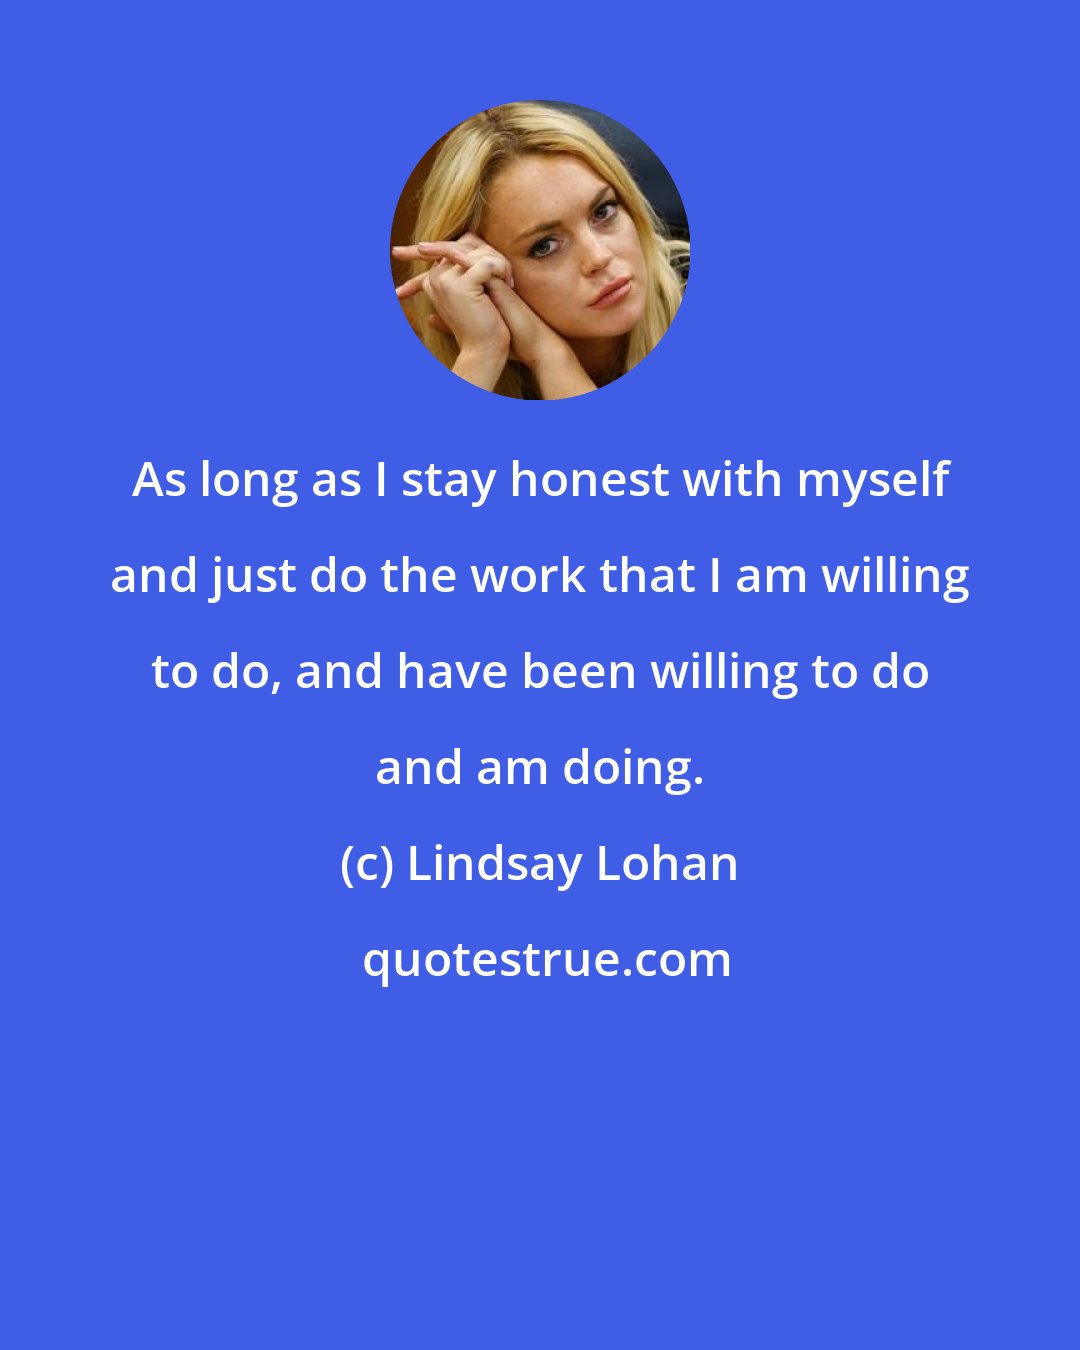 Lindsay Lohan: As long as I stay honest with myself and just do the work that I am willing to do, and have been willing to do and am doing.